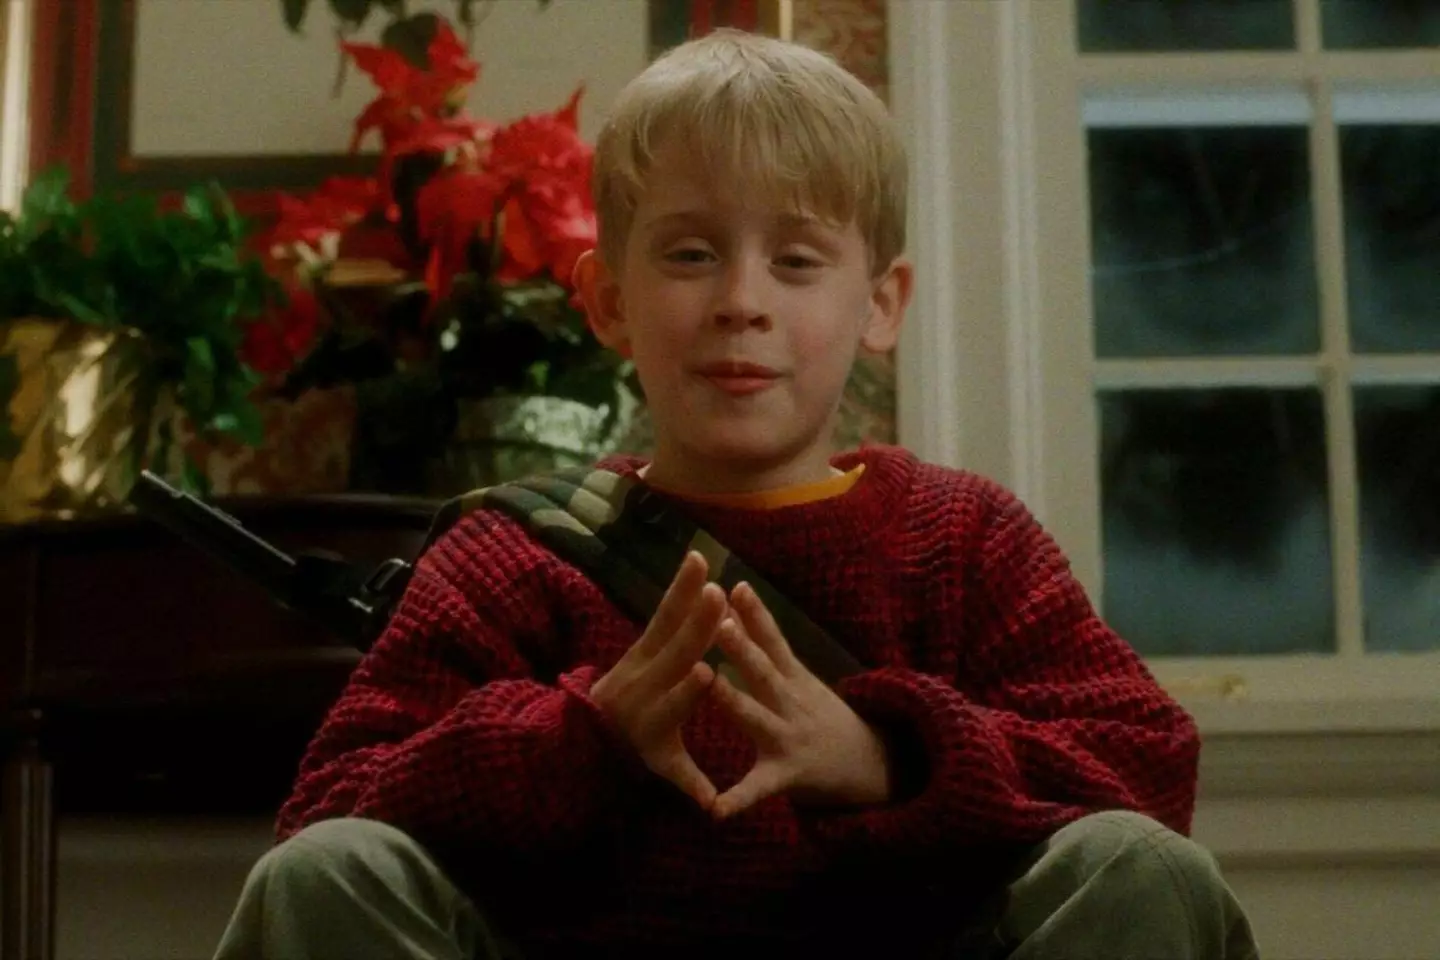 Fans think Kevin McCallister grew up to be a bloodthirsty killer.